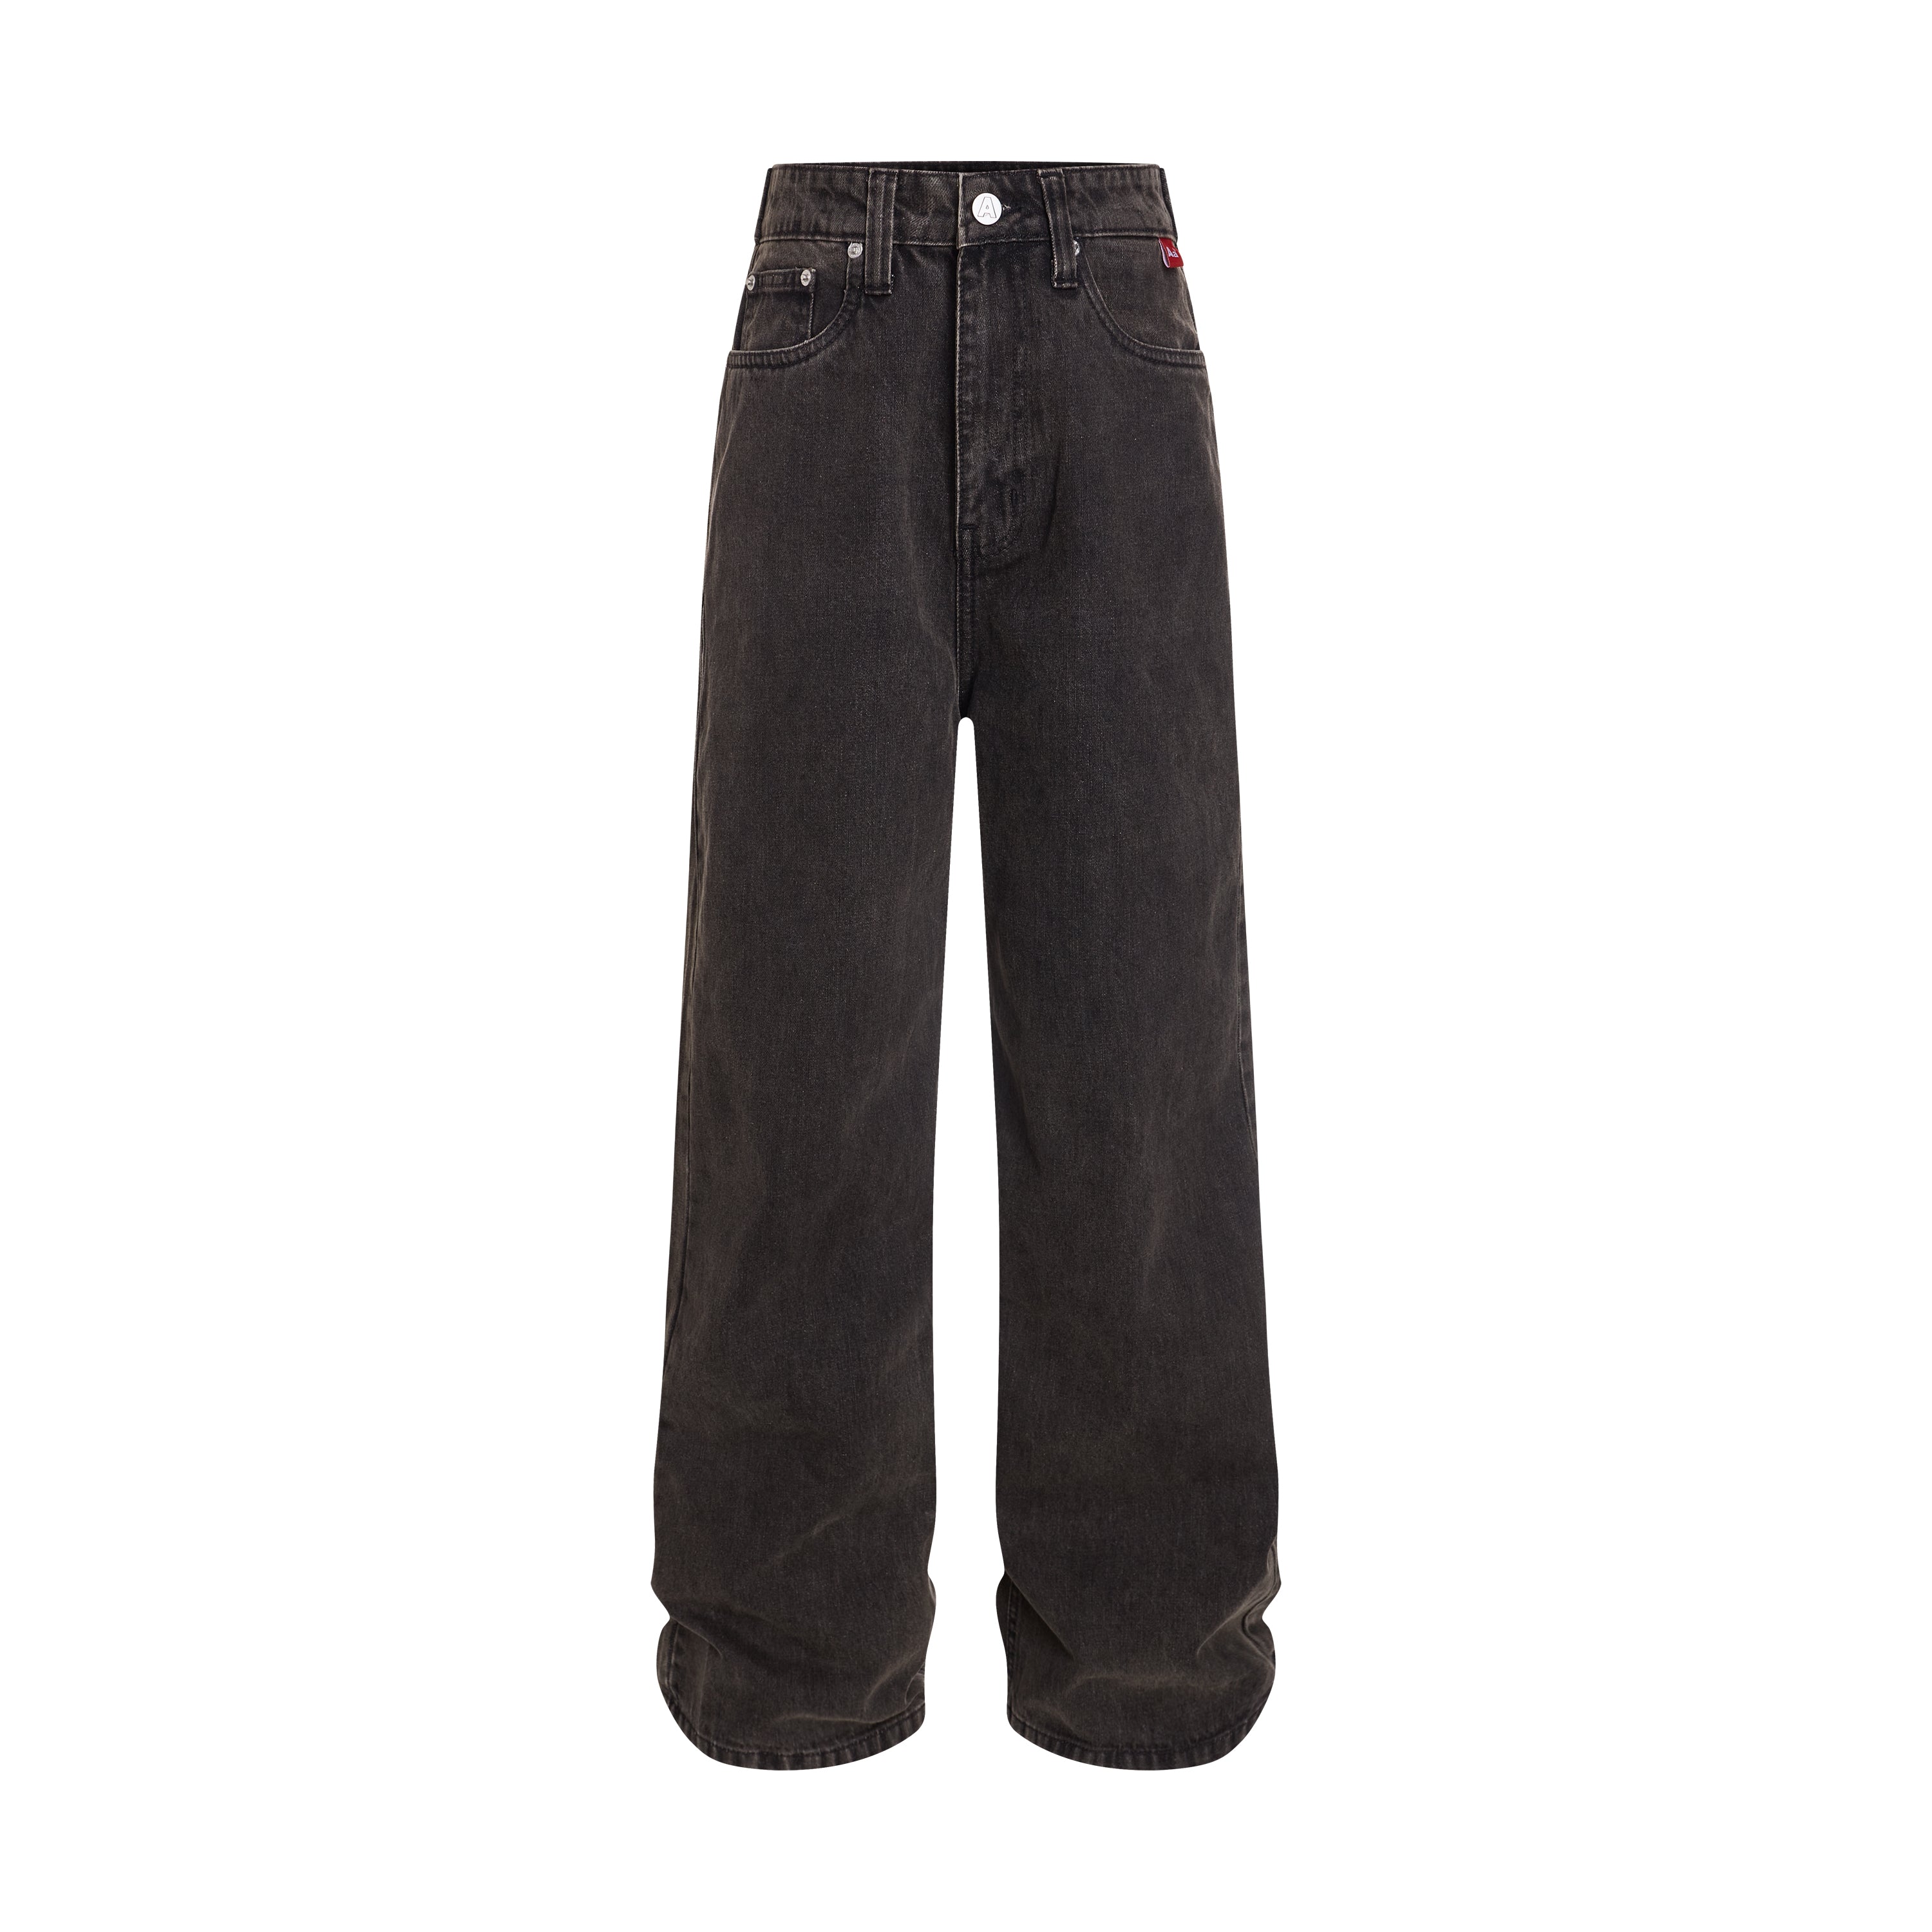 AA VINTAGE RELAX JEANS - ASH GREY